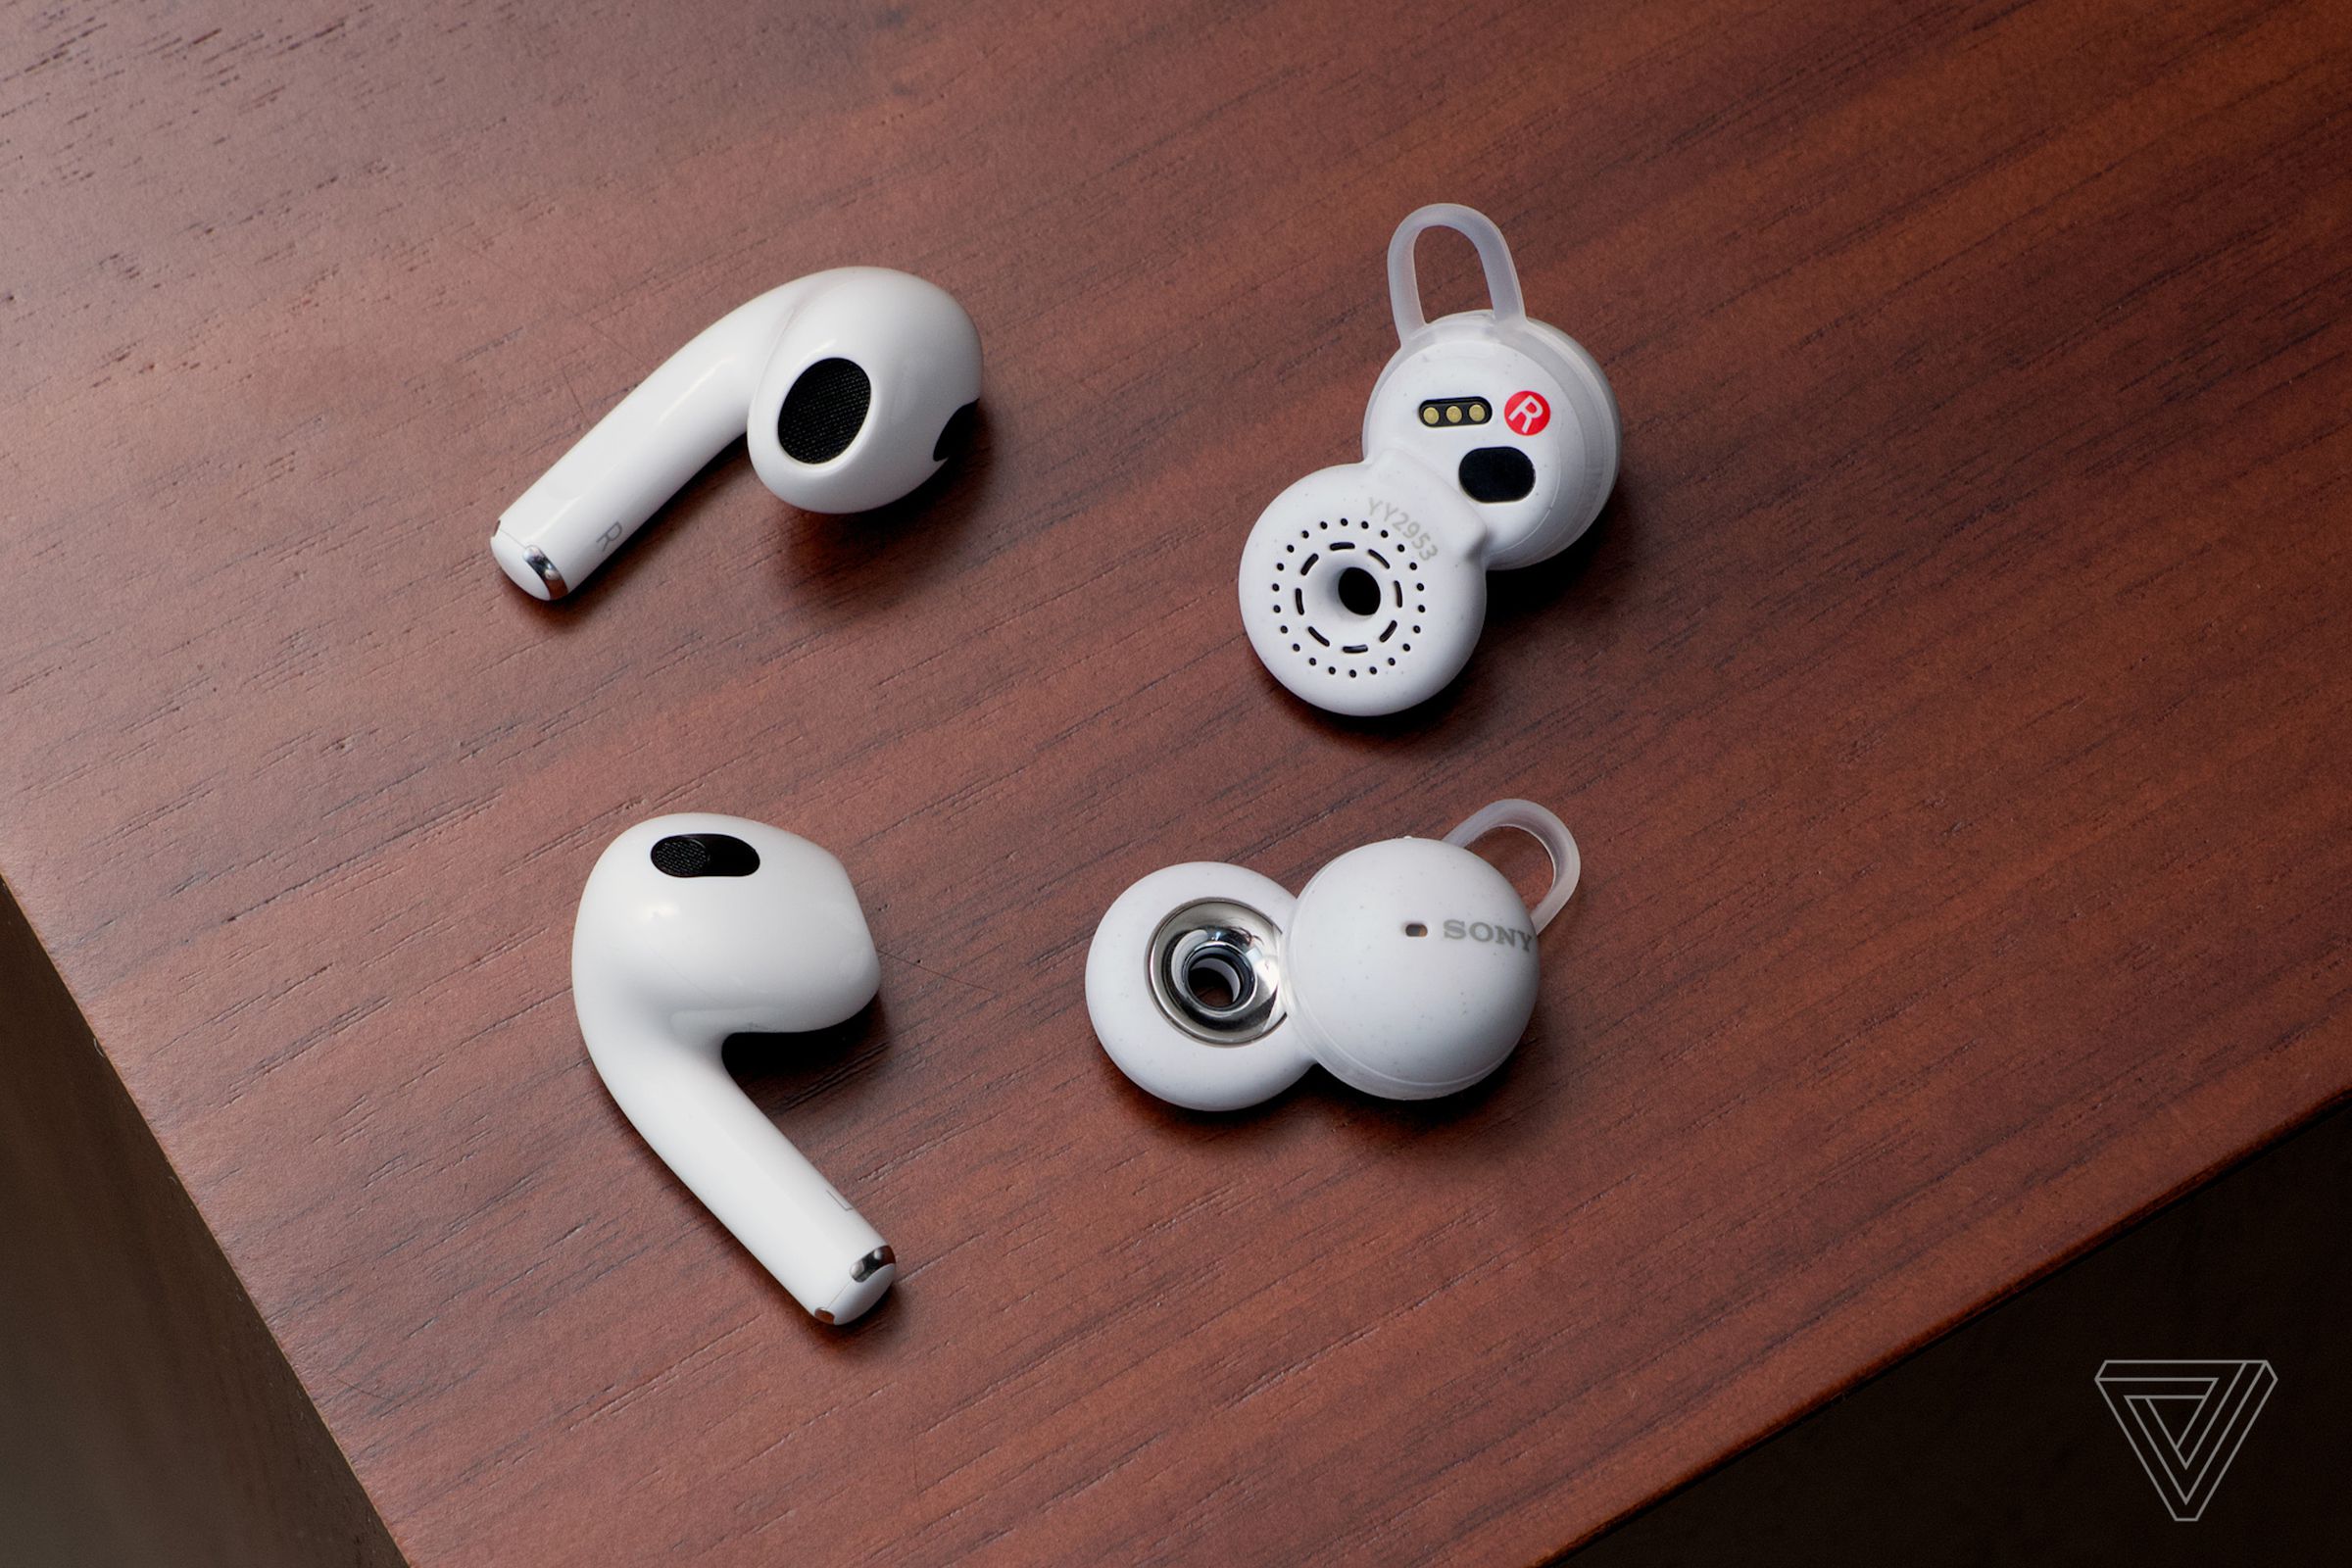 Sony’s LinkBuds are slightly lighter than Apple’s third-generation AirPods.